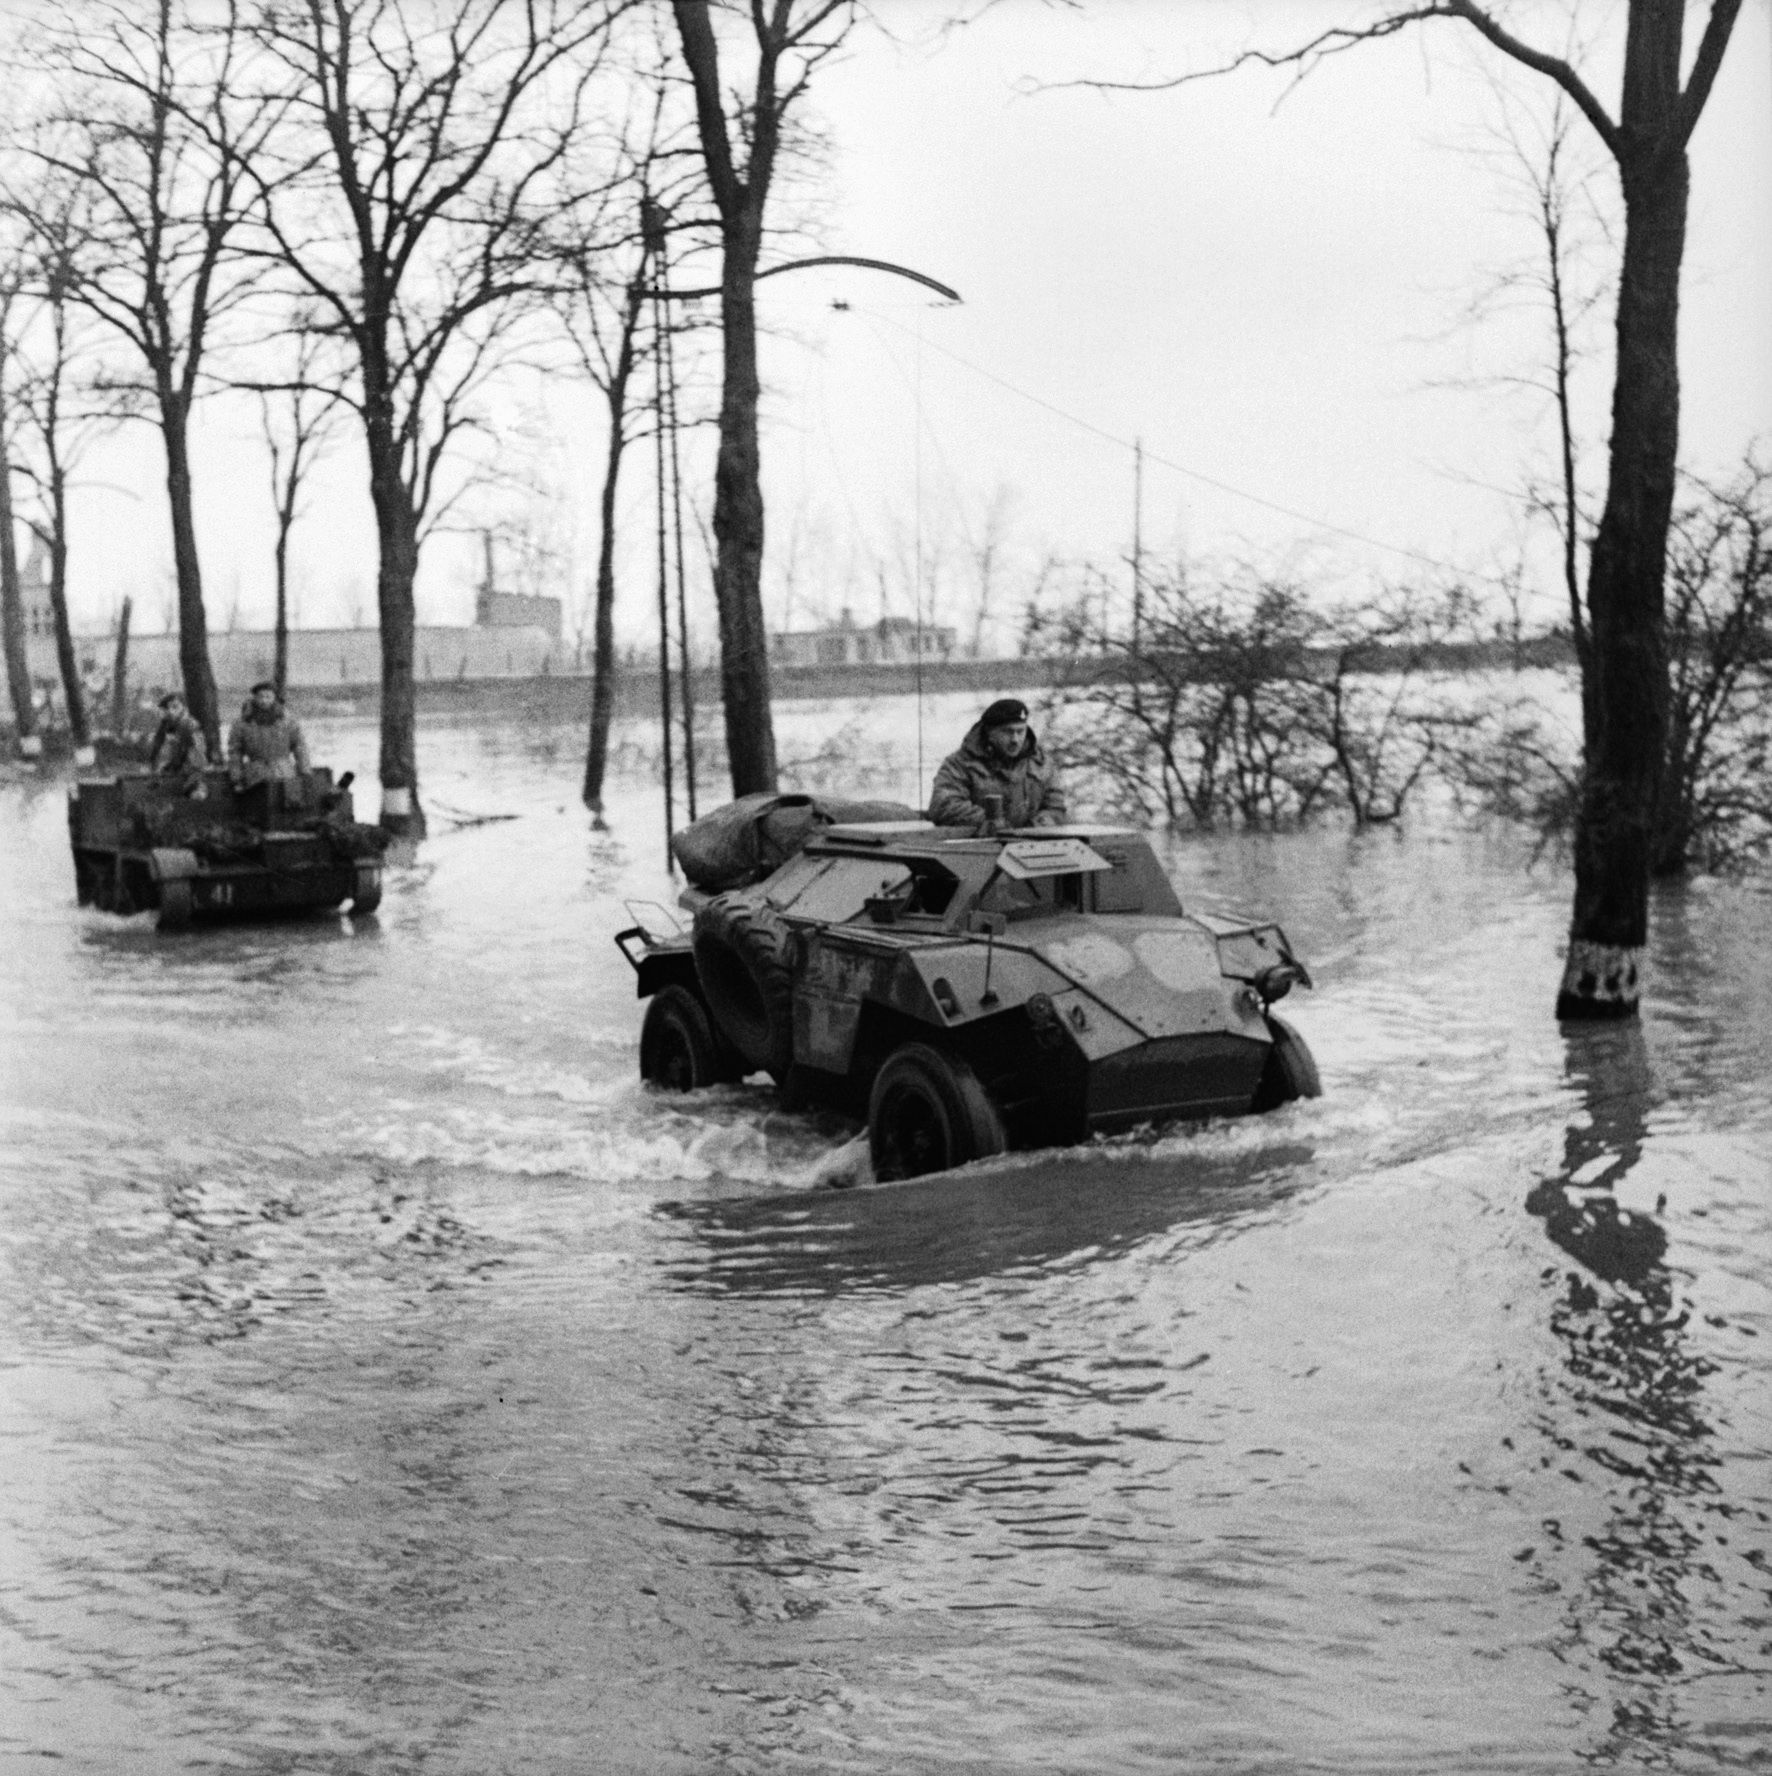 The progress of British armored vehicles was impeded when the Germans flooded low-lying areas. A British Humber scout car and a universal carrier are shown crossing a flooded road between the towns of Beek and Kranenburg.